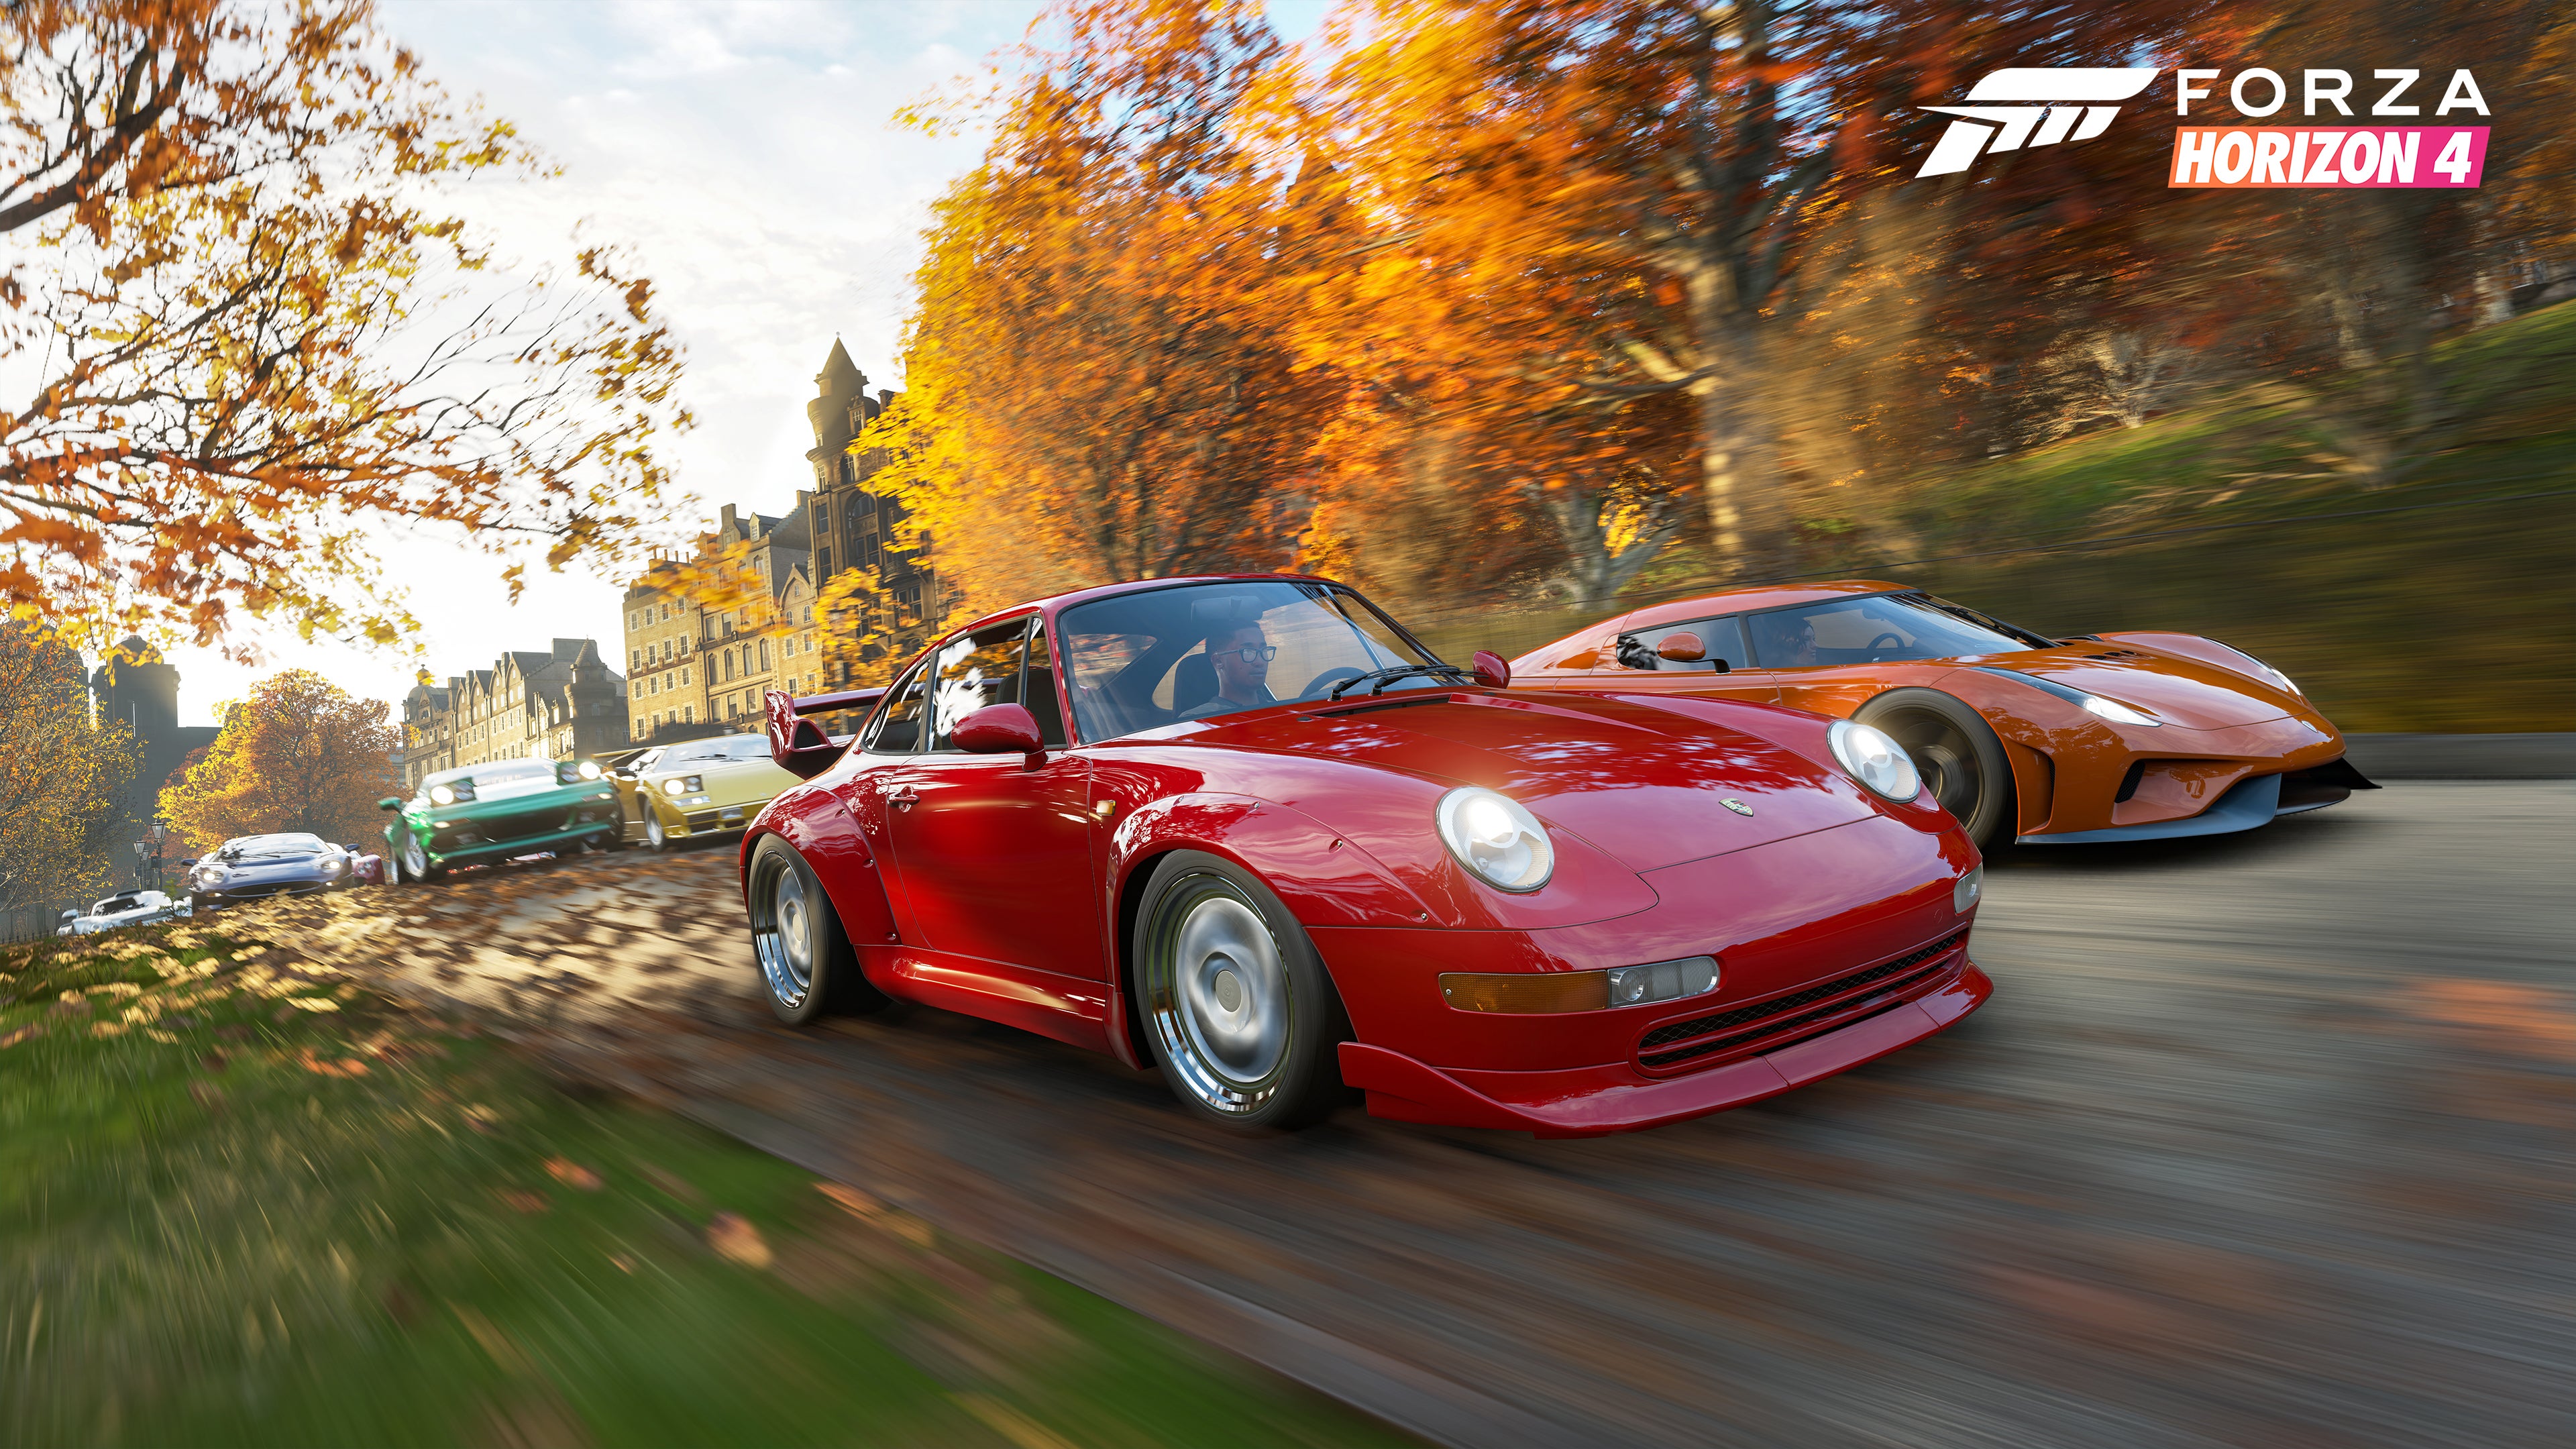 Image for Over 2 million people have played Forza Horizon 4 since release last week